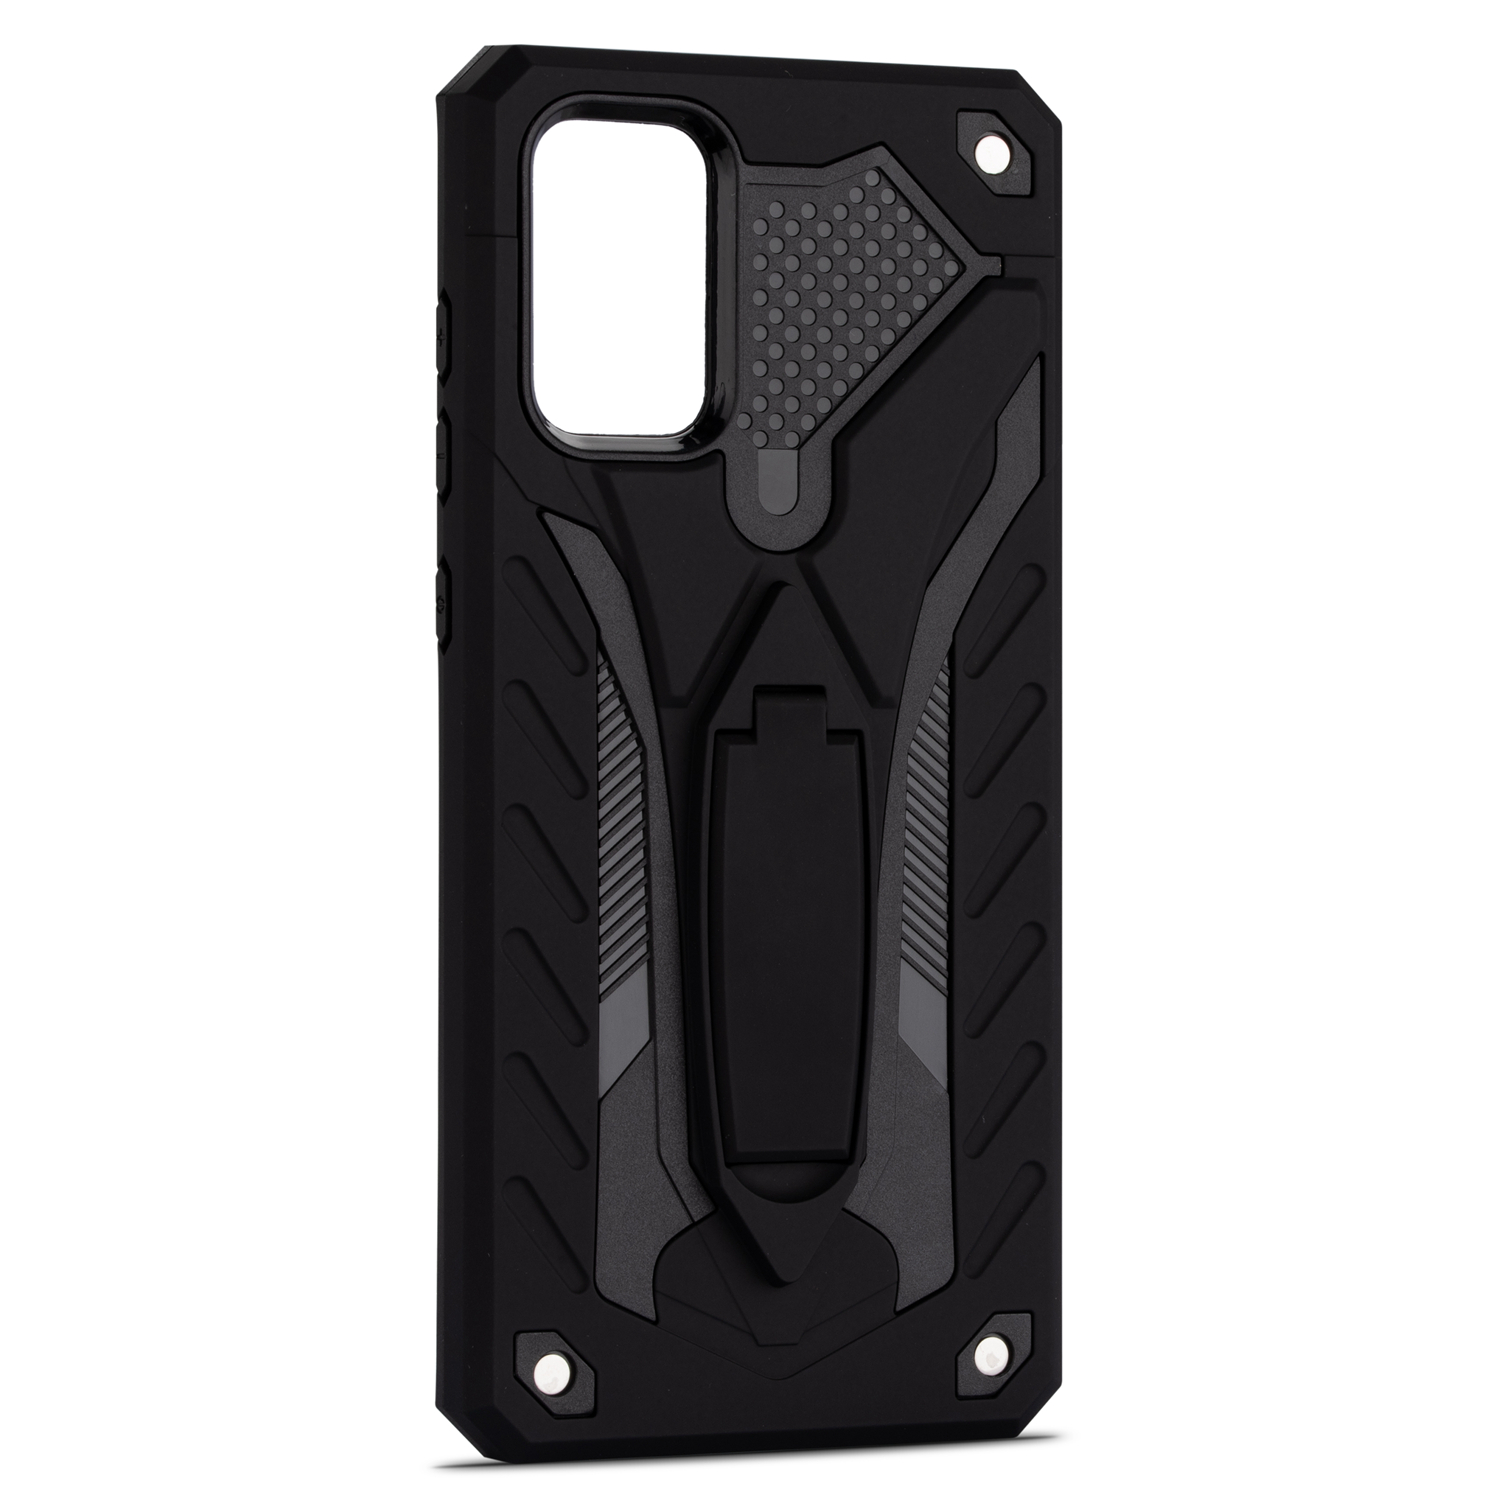 Bakeey-for-Xiaomi-Redmi-9A-Case-Armor-Shockproof-Anti-Fingerprint-with-Ring-Bracket-Stand-PC--TPU-Pr-1726498-4